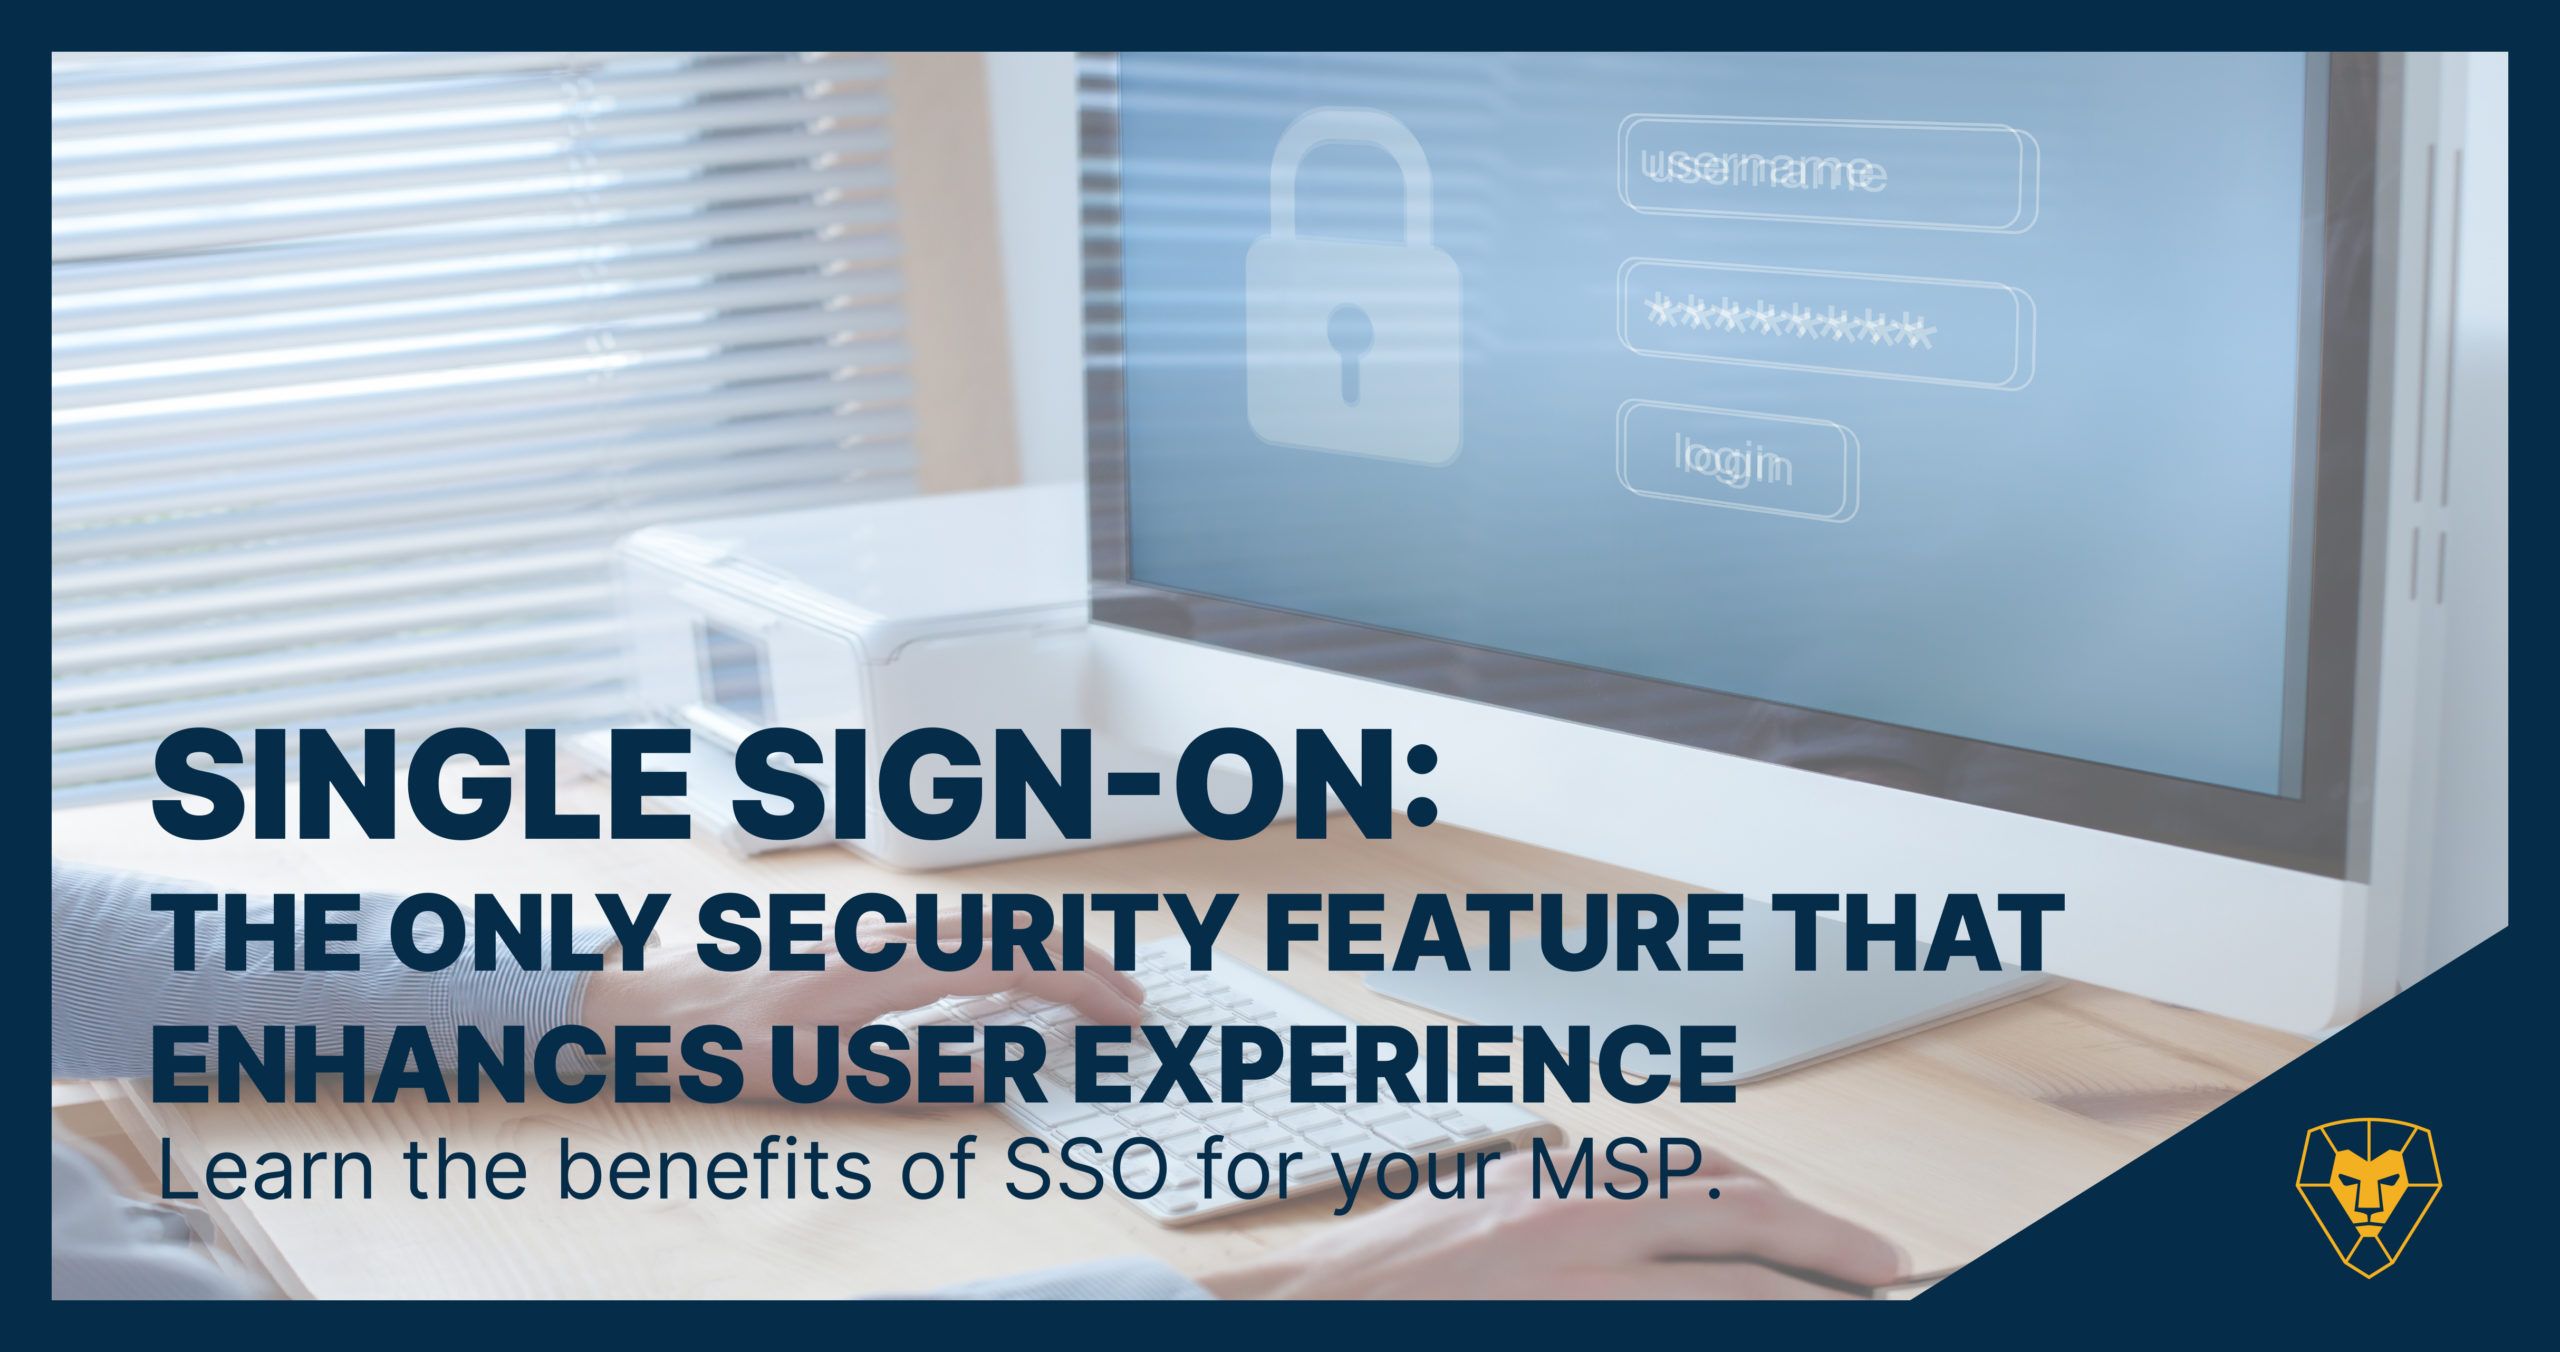 Single Sign-On The Only Security Feature that enhances user experience